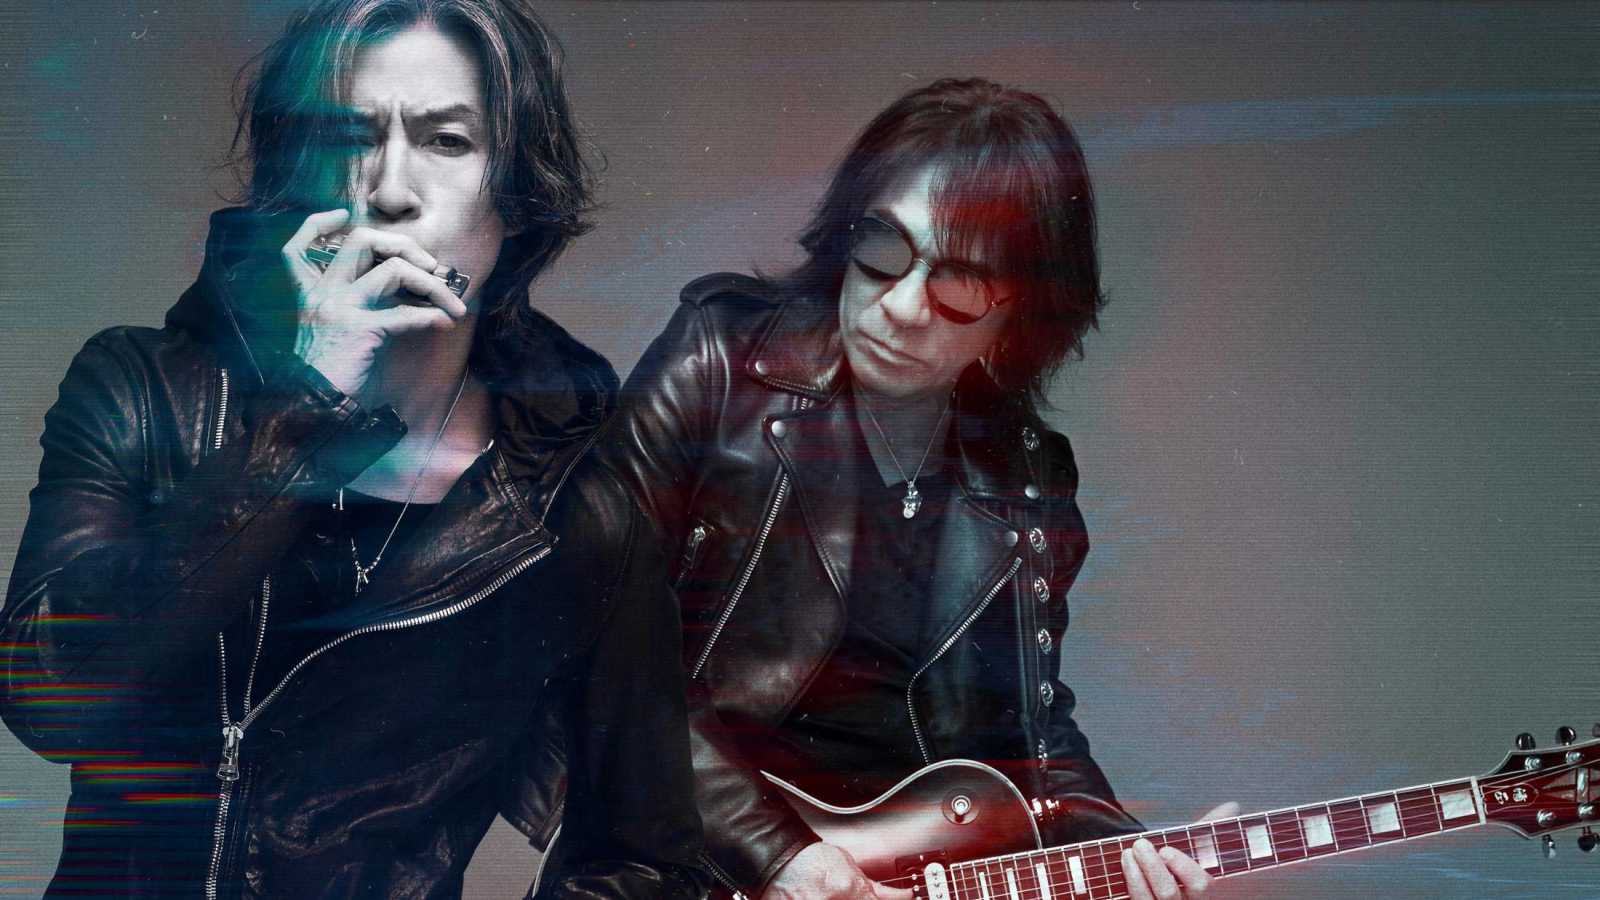 New Digital Single from B'z © B'z. All rights reserved.